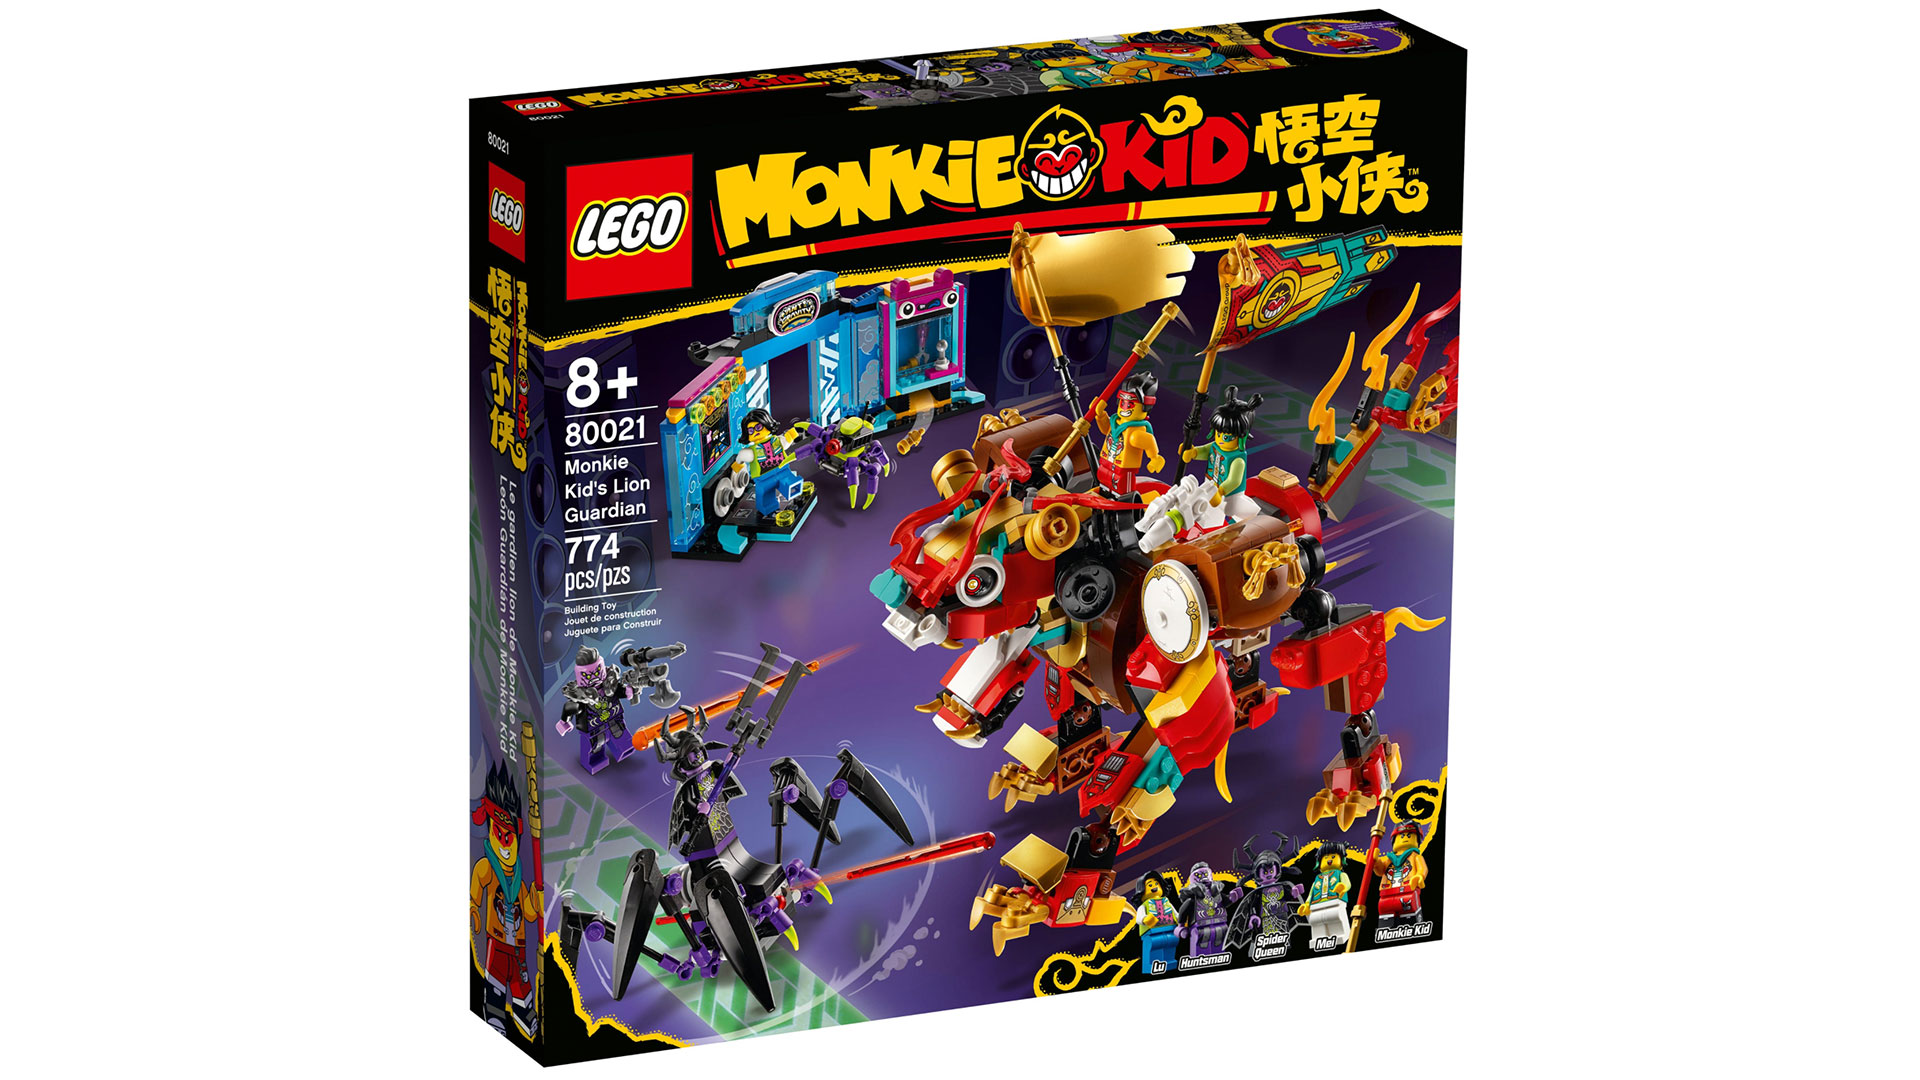 Youngsters will love showing off this action-packed LEGO® Monkie Kid™ Lion Guardian playset (80021) to their friends. It features a fully posable Lion Guardian mech toy with 2 hidden spring-loaded shooters, the Spider Queen’s battle rig with movable legs and 2 spring-loaded shooters, plus a posable robotic spider. A great gift for trend-setting kids, this set also includes a buildable arcade with a toy-grabbing claw game that dispenses toy elements, plus 5 minifigures with cool weapons for role-play battles.